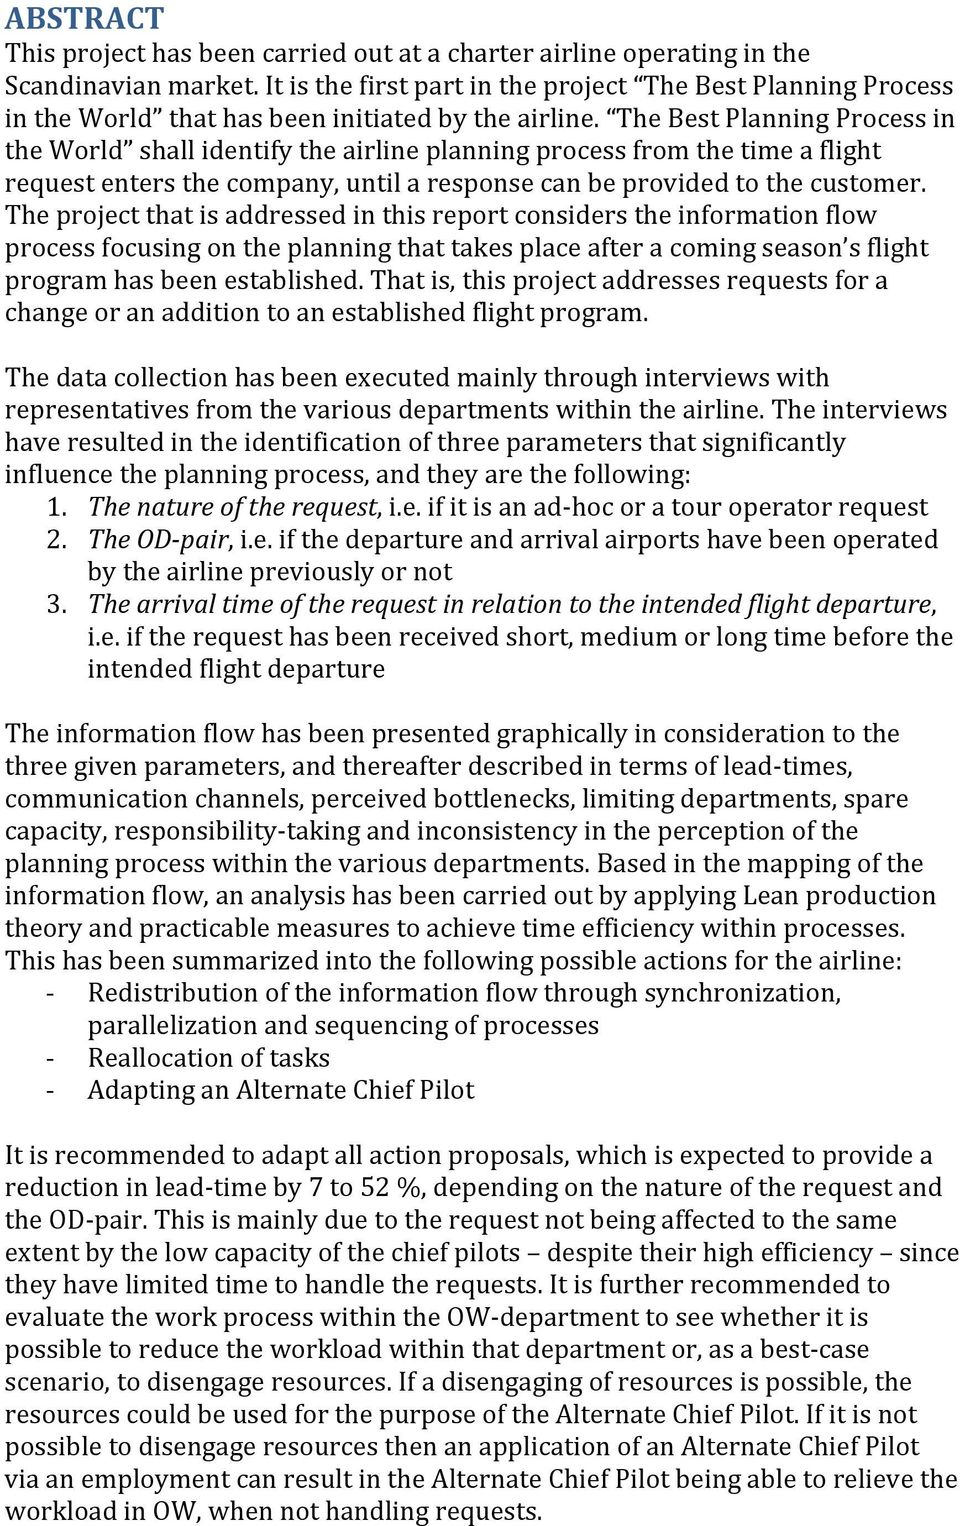 The Best Planning Process in the World shall identify the airline planning process from the time a flight request enters the company, until a response can be provided to the customer.